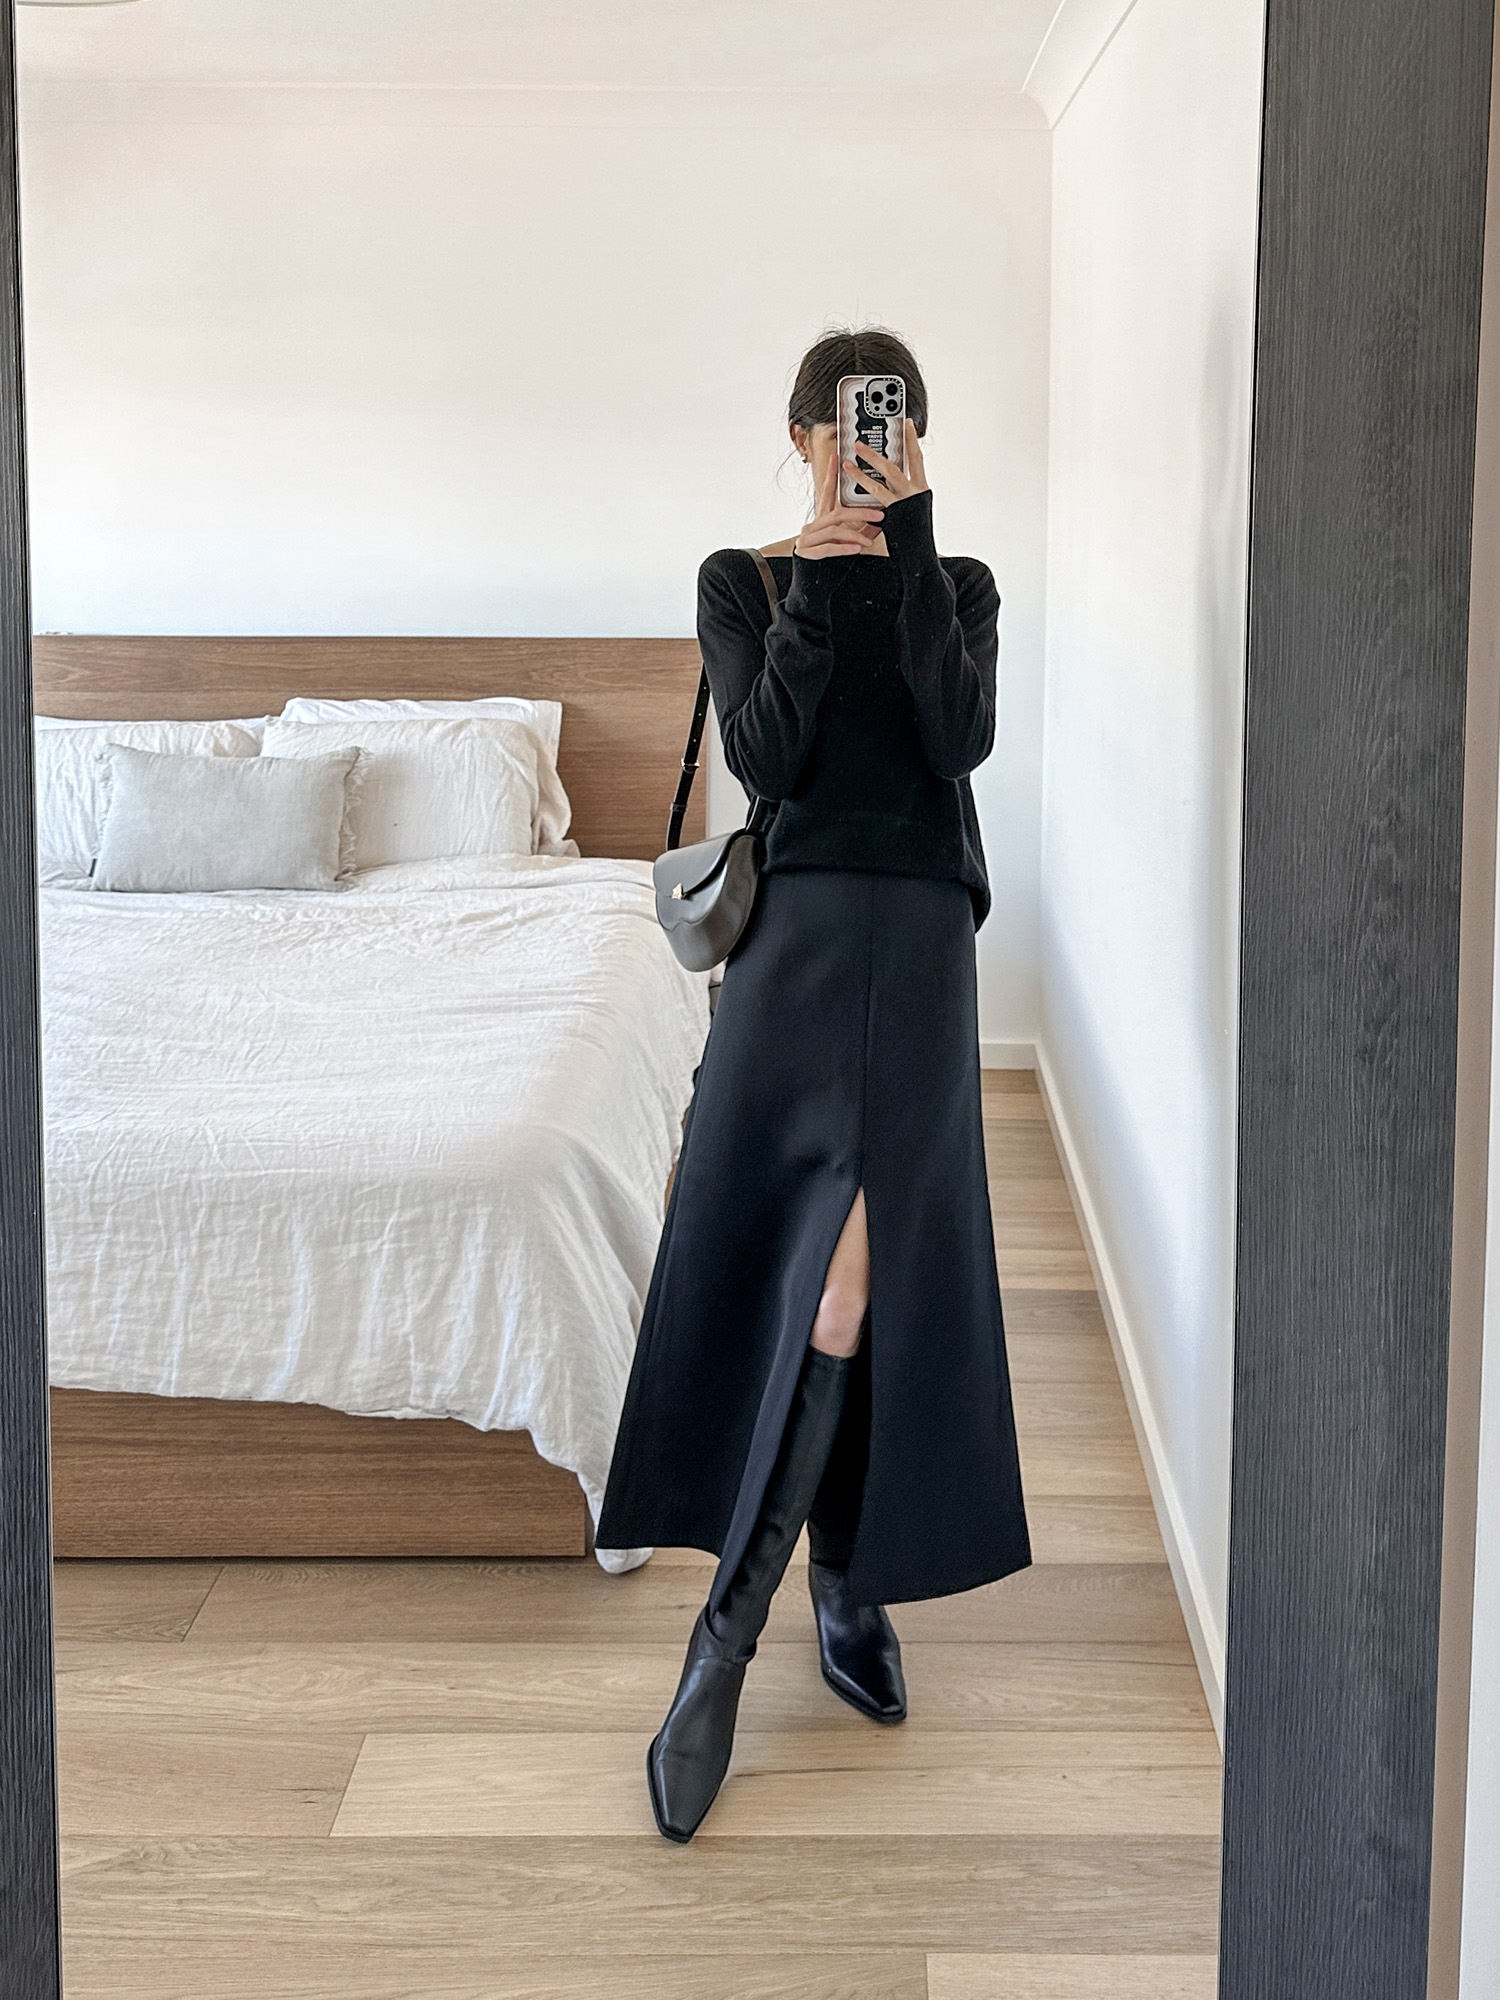 All black outfit wearing MAJR Label split skirt and Arket leather boots